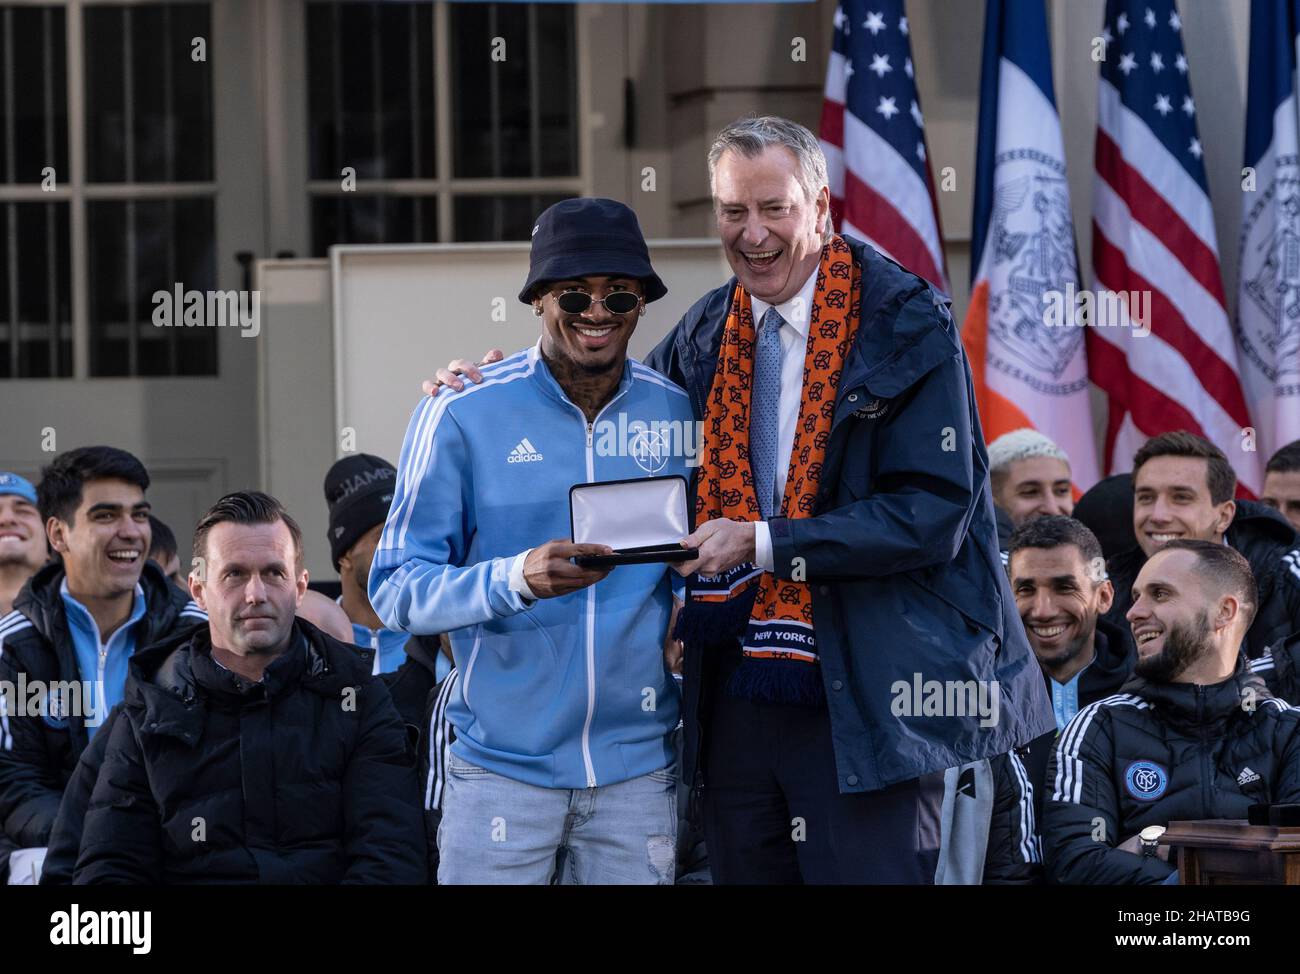 New York, NY - December 14, 2021: Forward Thiago received Keys to the City from mayor Bill de Blasio during celebration for NYCFC winning the 2021 MLS Cup on City Hall steps Stock Photo